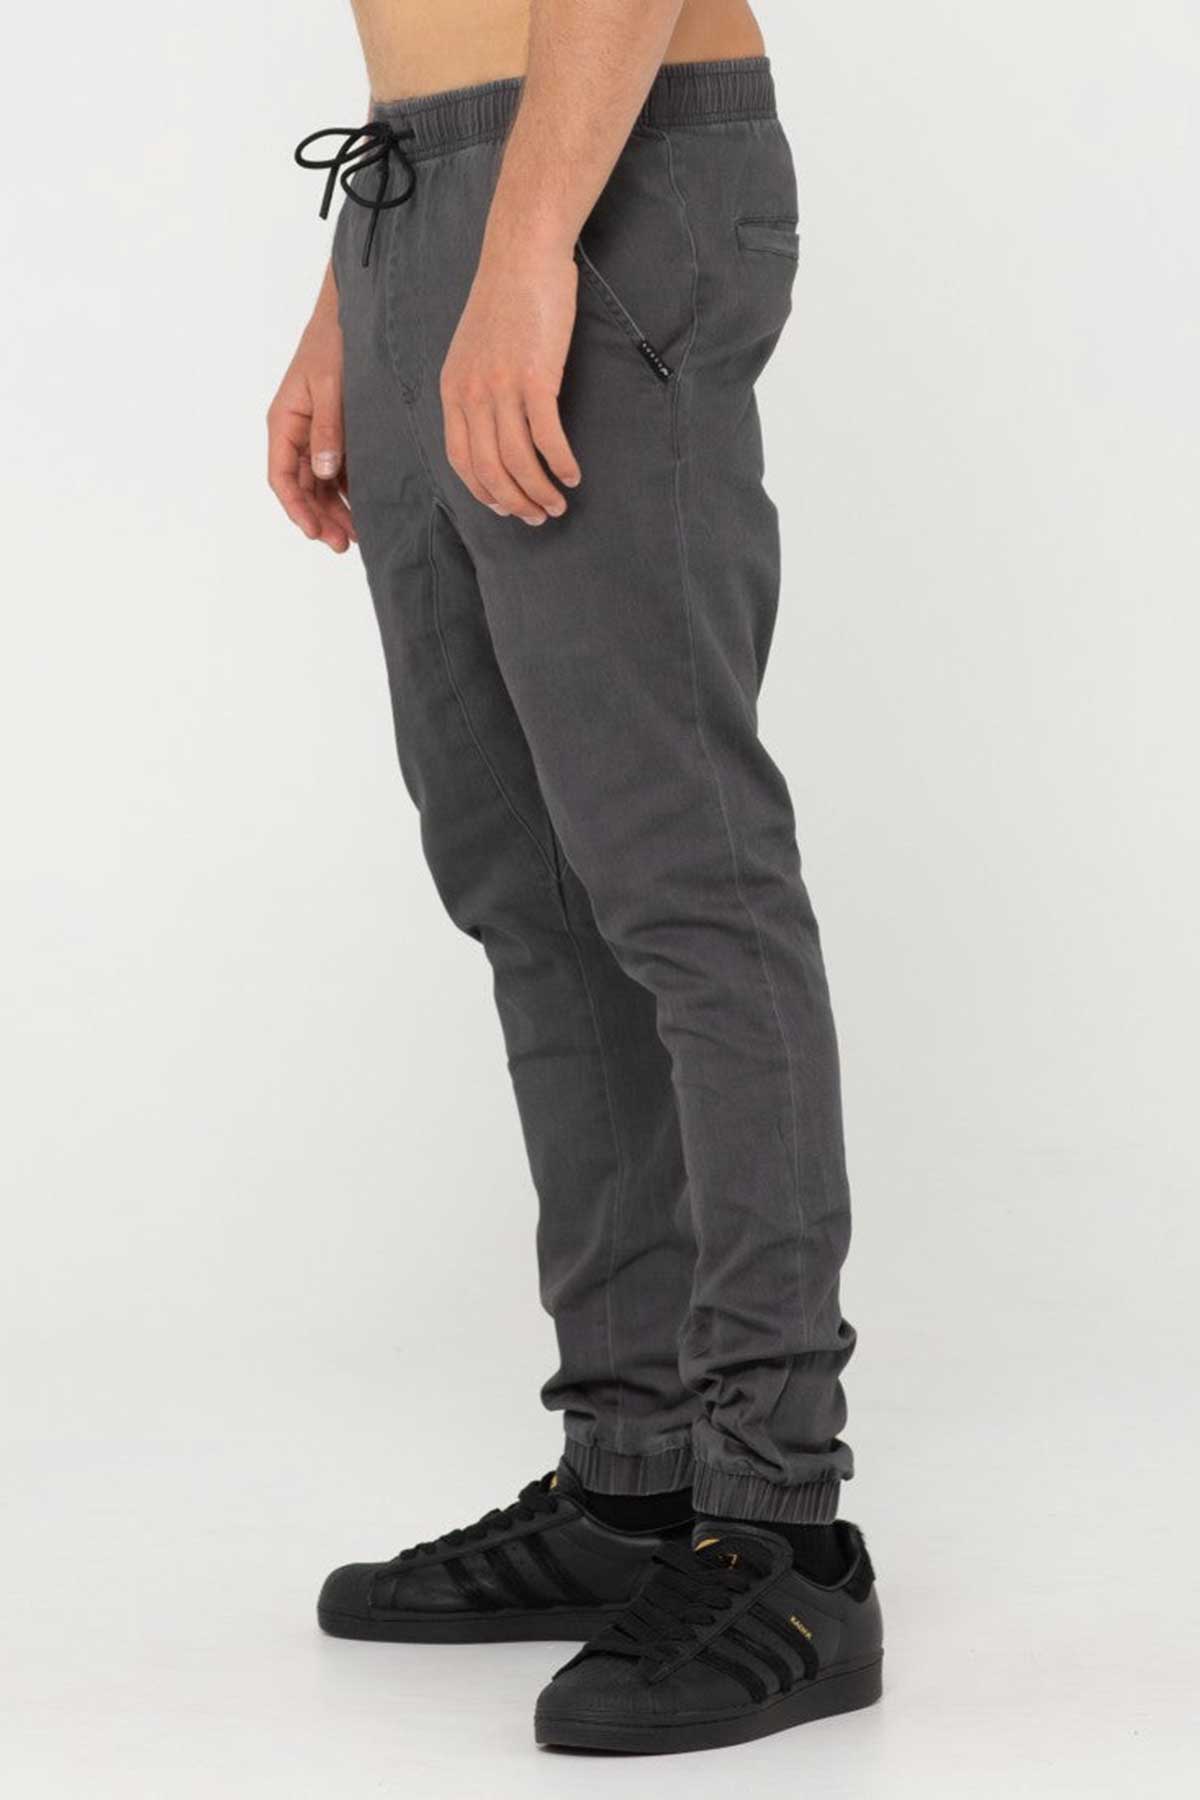 Rusty Mens Elastic Pant Hook Out side view